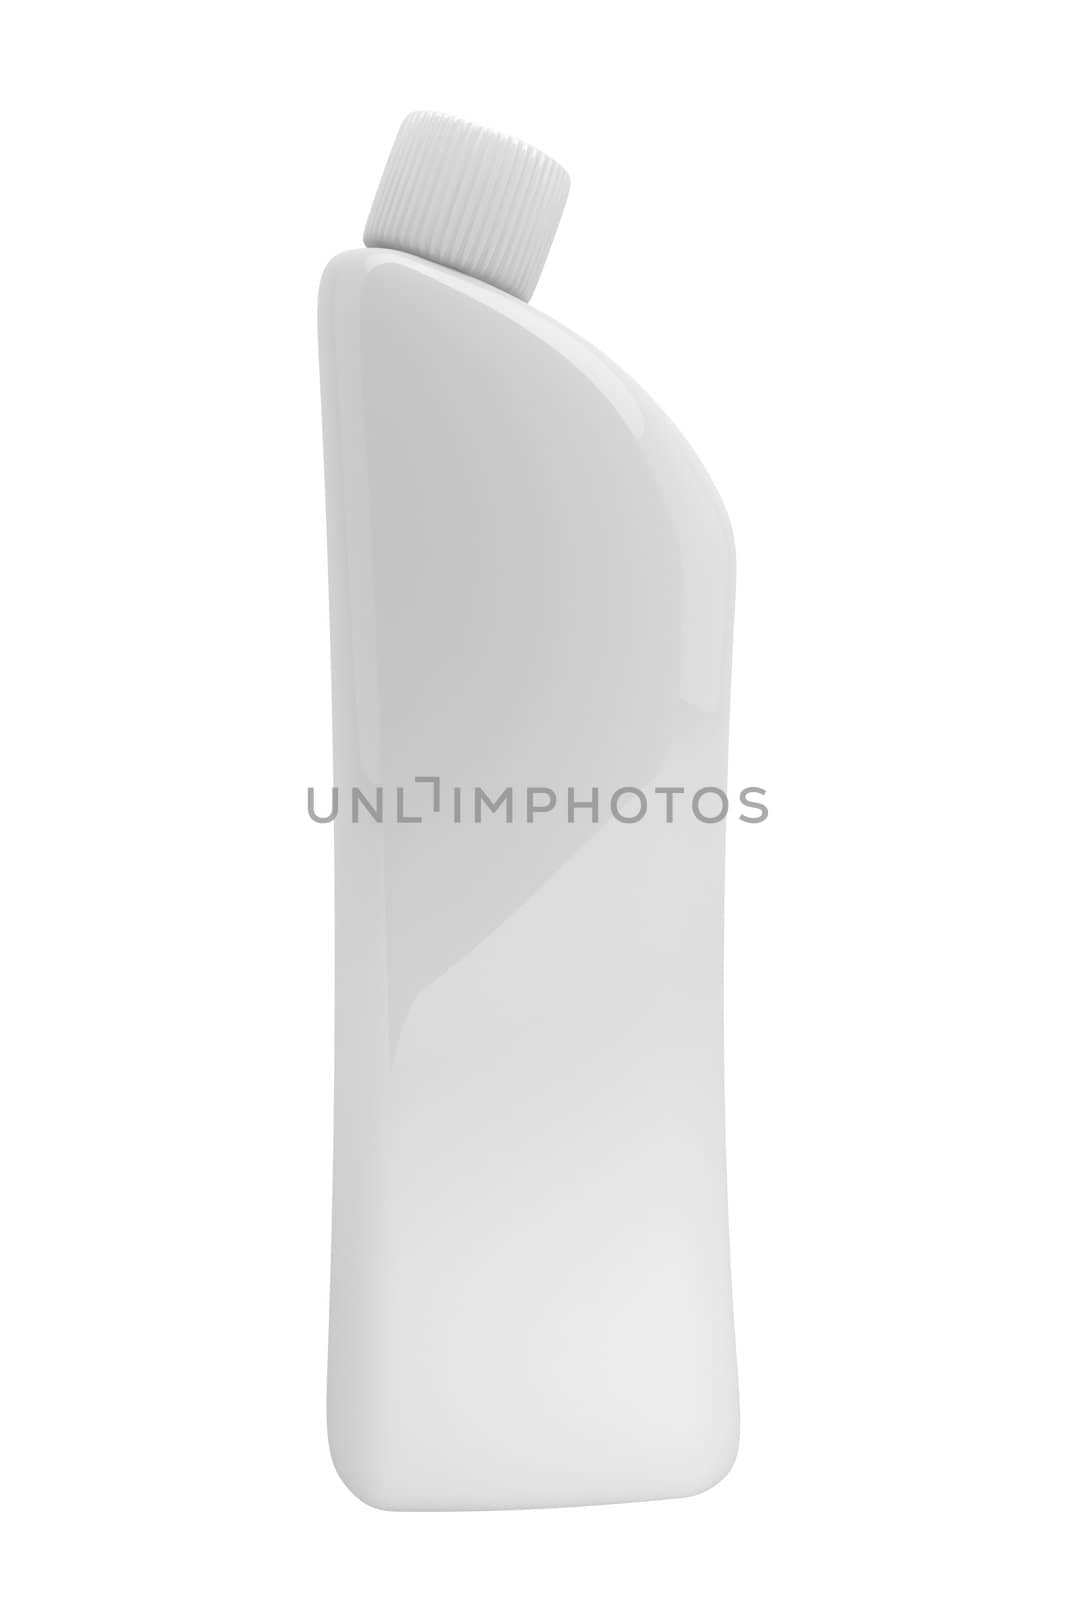 Detergent bottle by magraphics